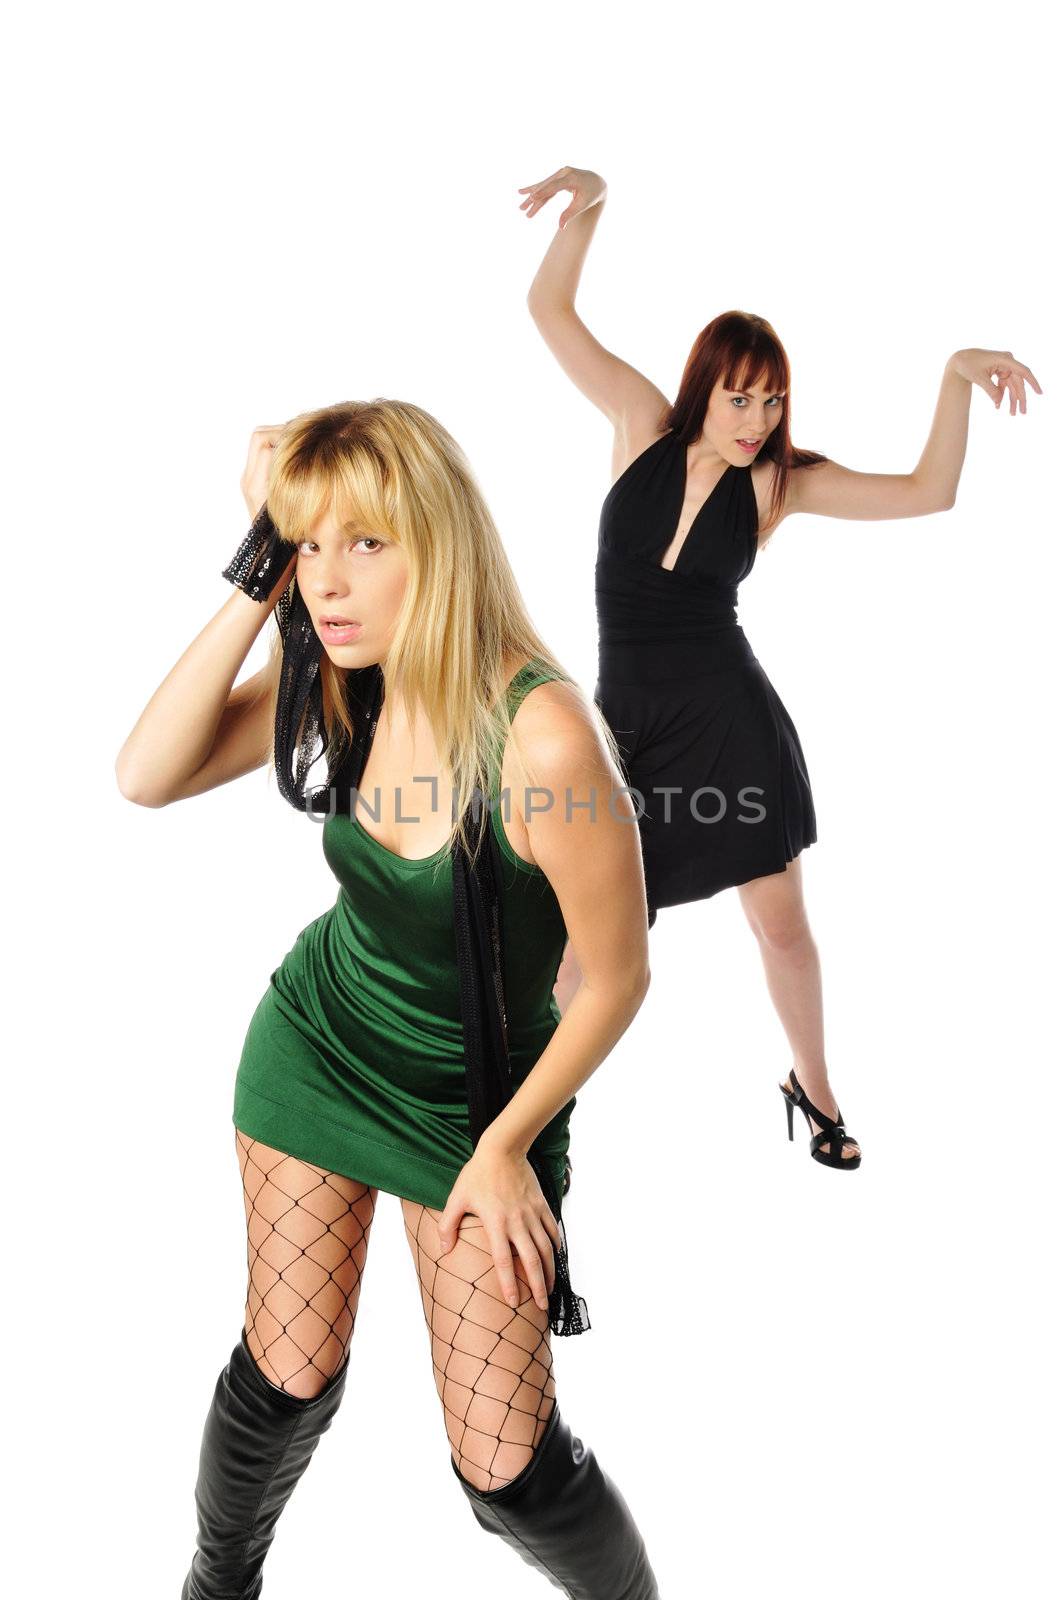 2 models dancing and getting crazy on a white background focus on the front model